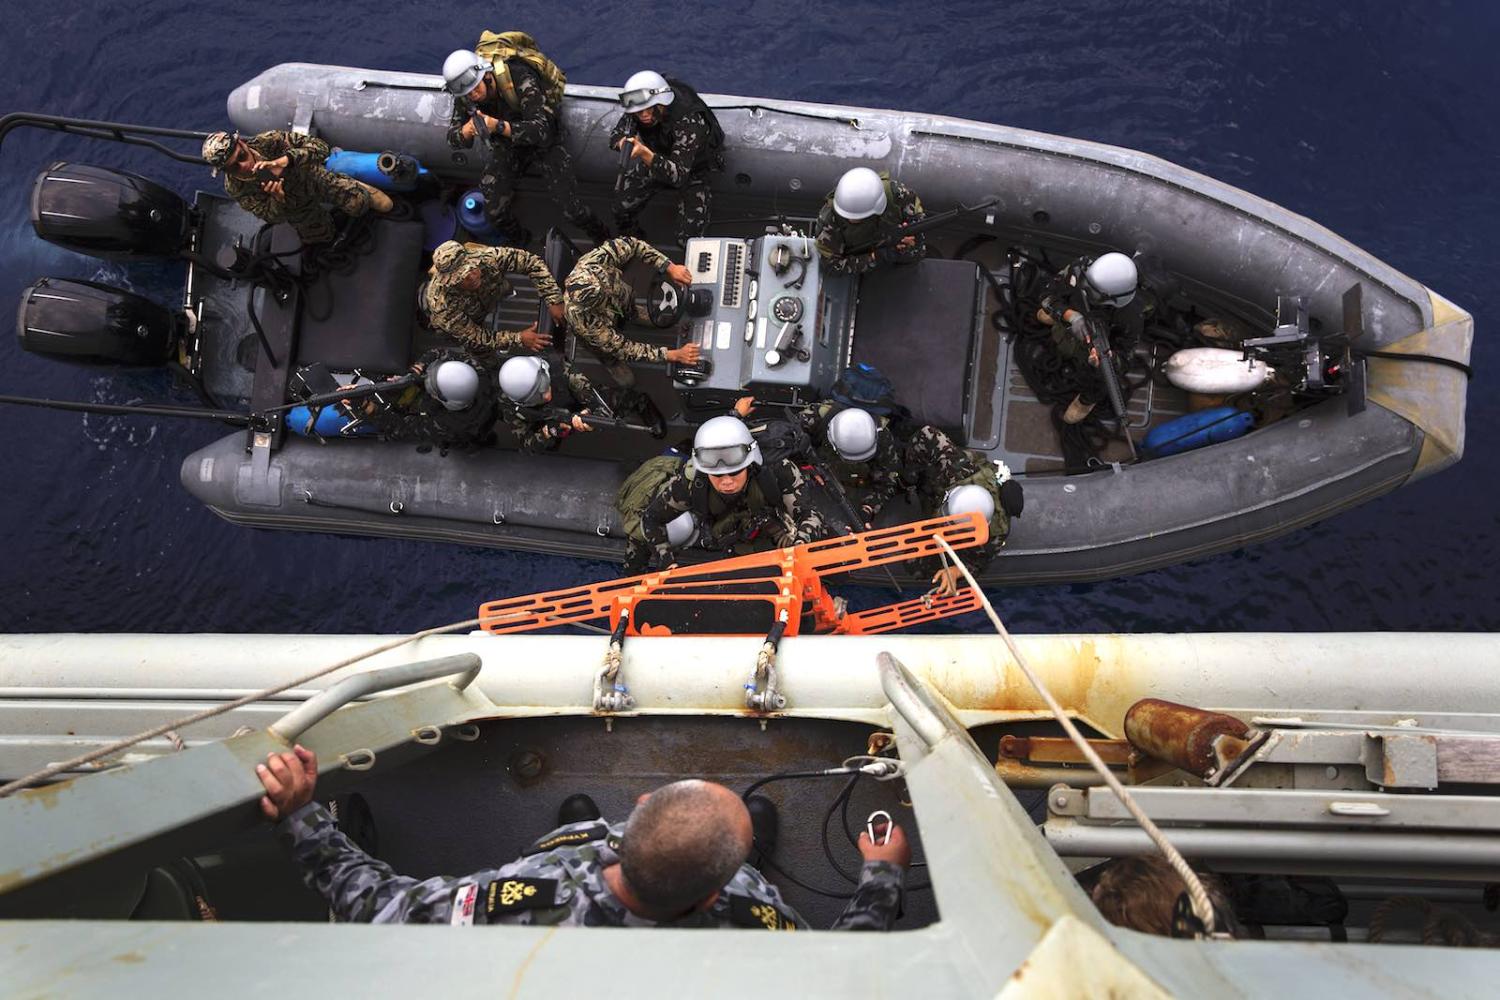 Members of the Armed Forces of the Philippines conduct a boarding exercise onboard HMAS Anzac as part of Exercise Lumbas 2018 (Department of Defence)